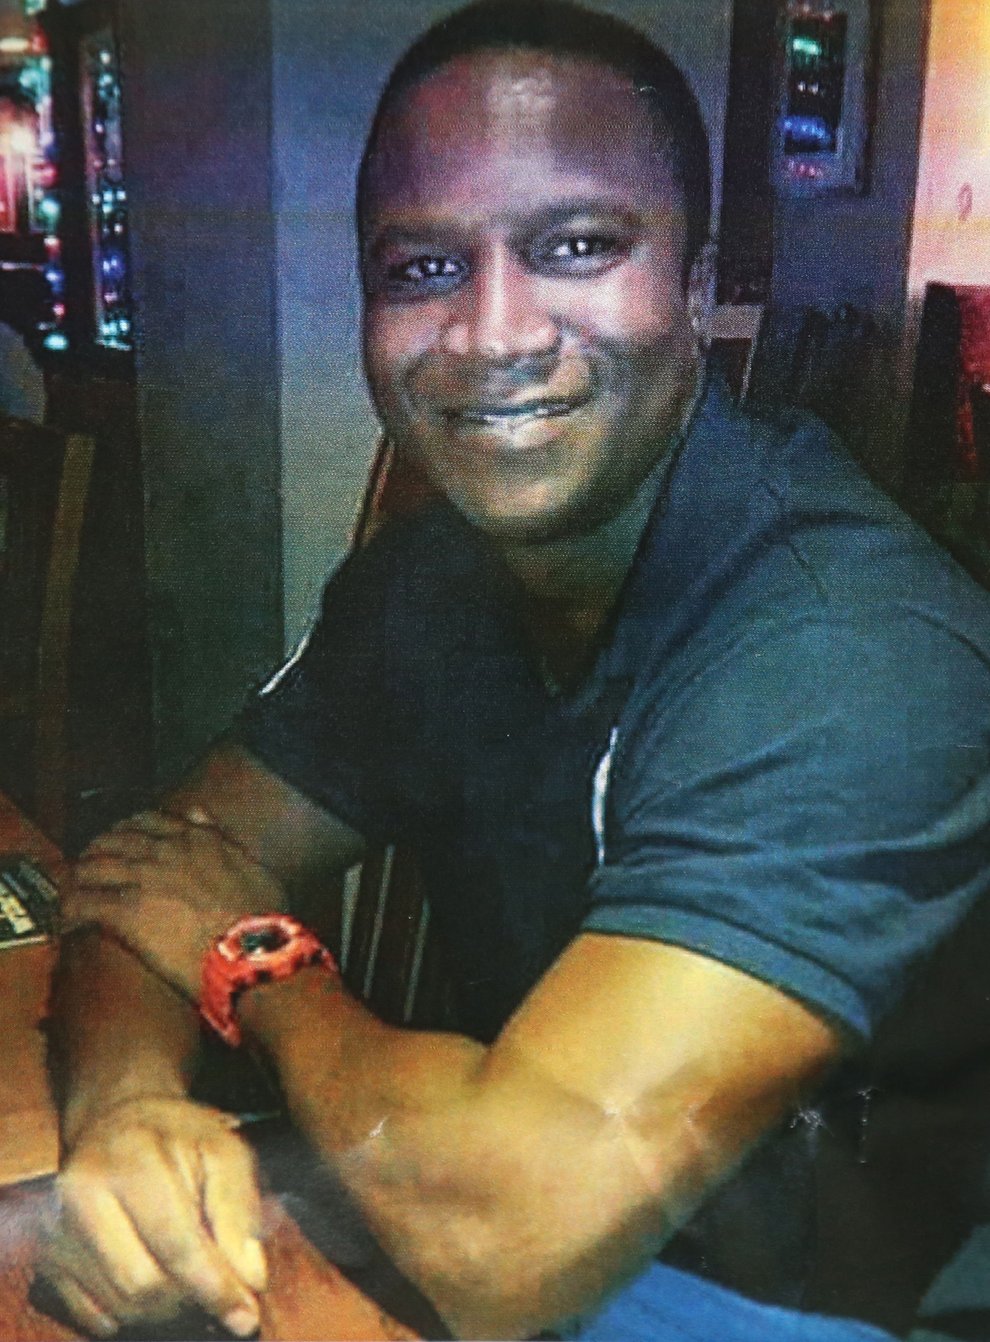 Sheku Bayoh died in police custody in May 2015 while being restrained by officers (handout/PA)